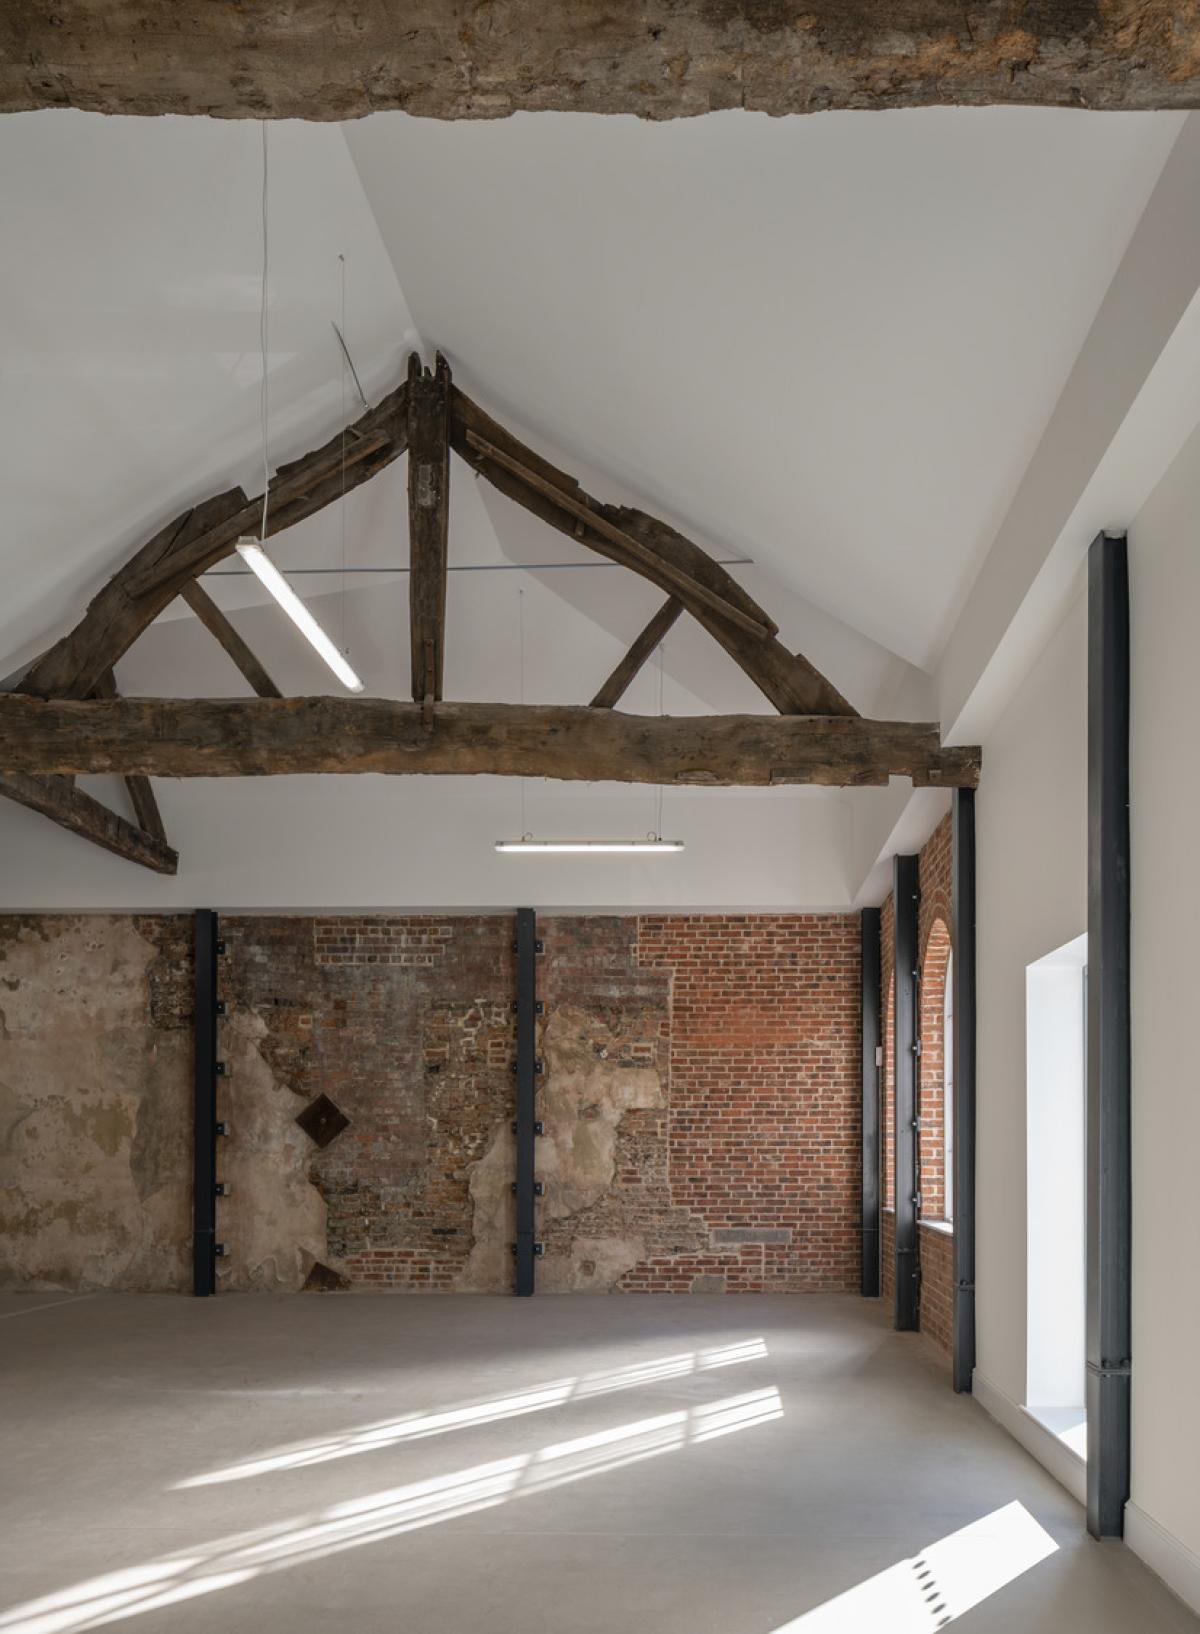 interior of first white cloth hall, showing vacant room and wooden beams